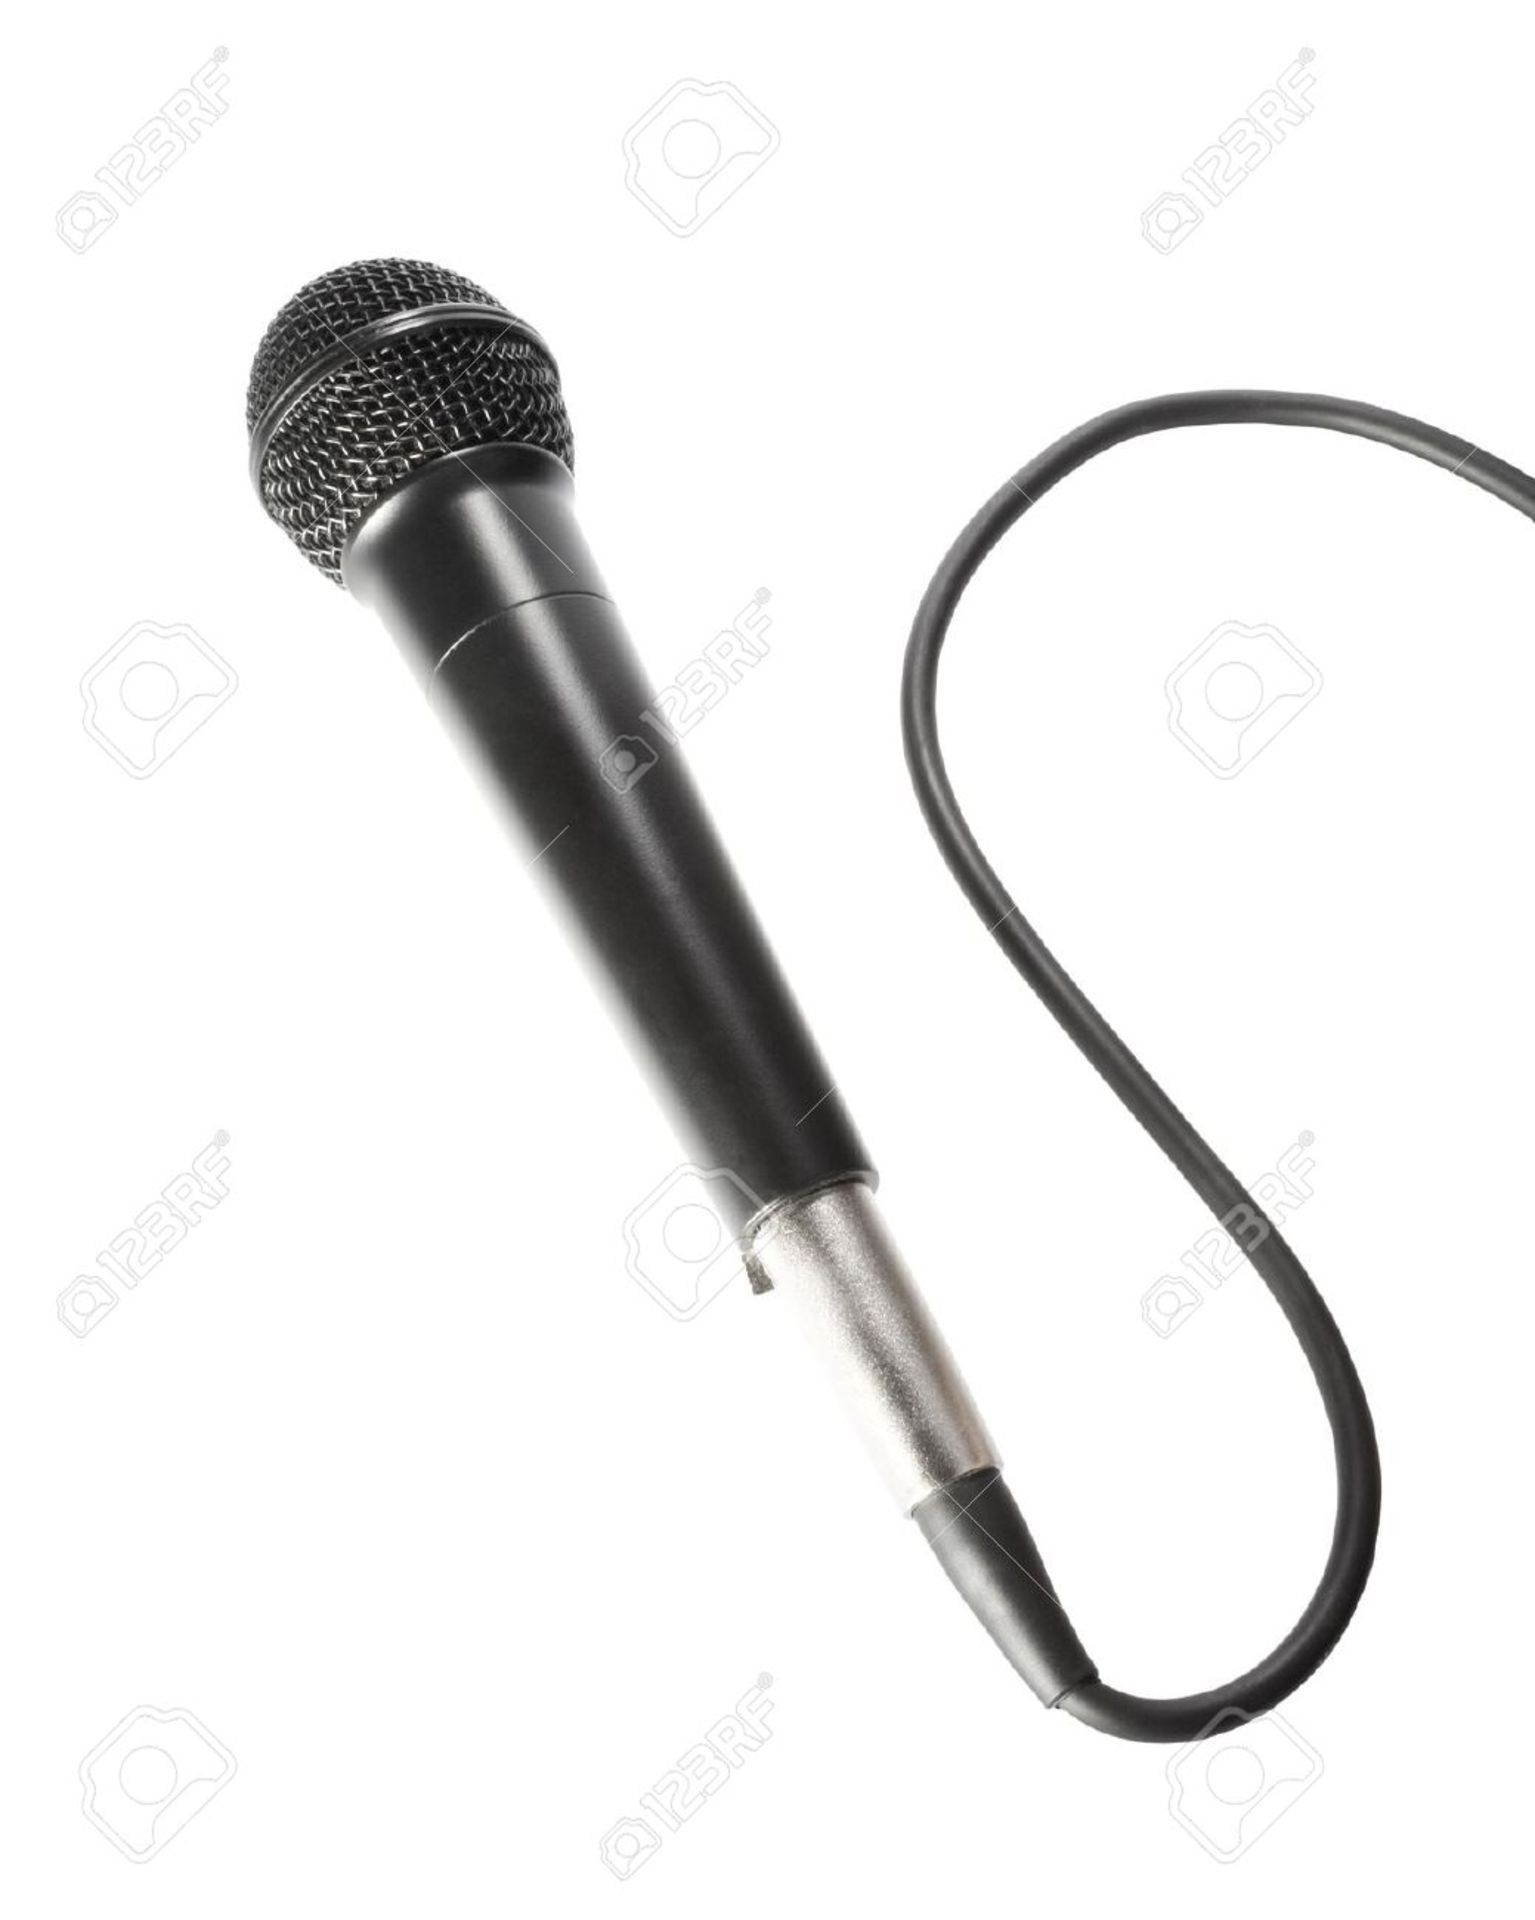 V Brand New Dynamic Microphone With Extra Adaptor And 9 Foot Cord - Ideal For Karaoke (picture is